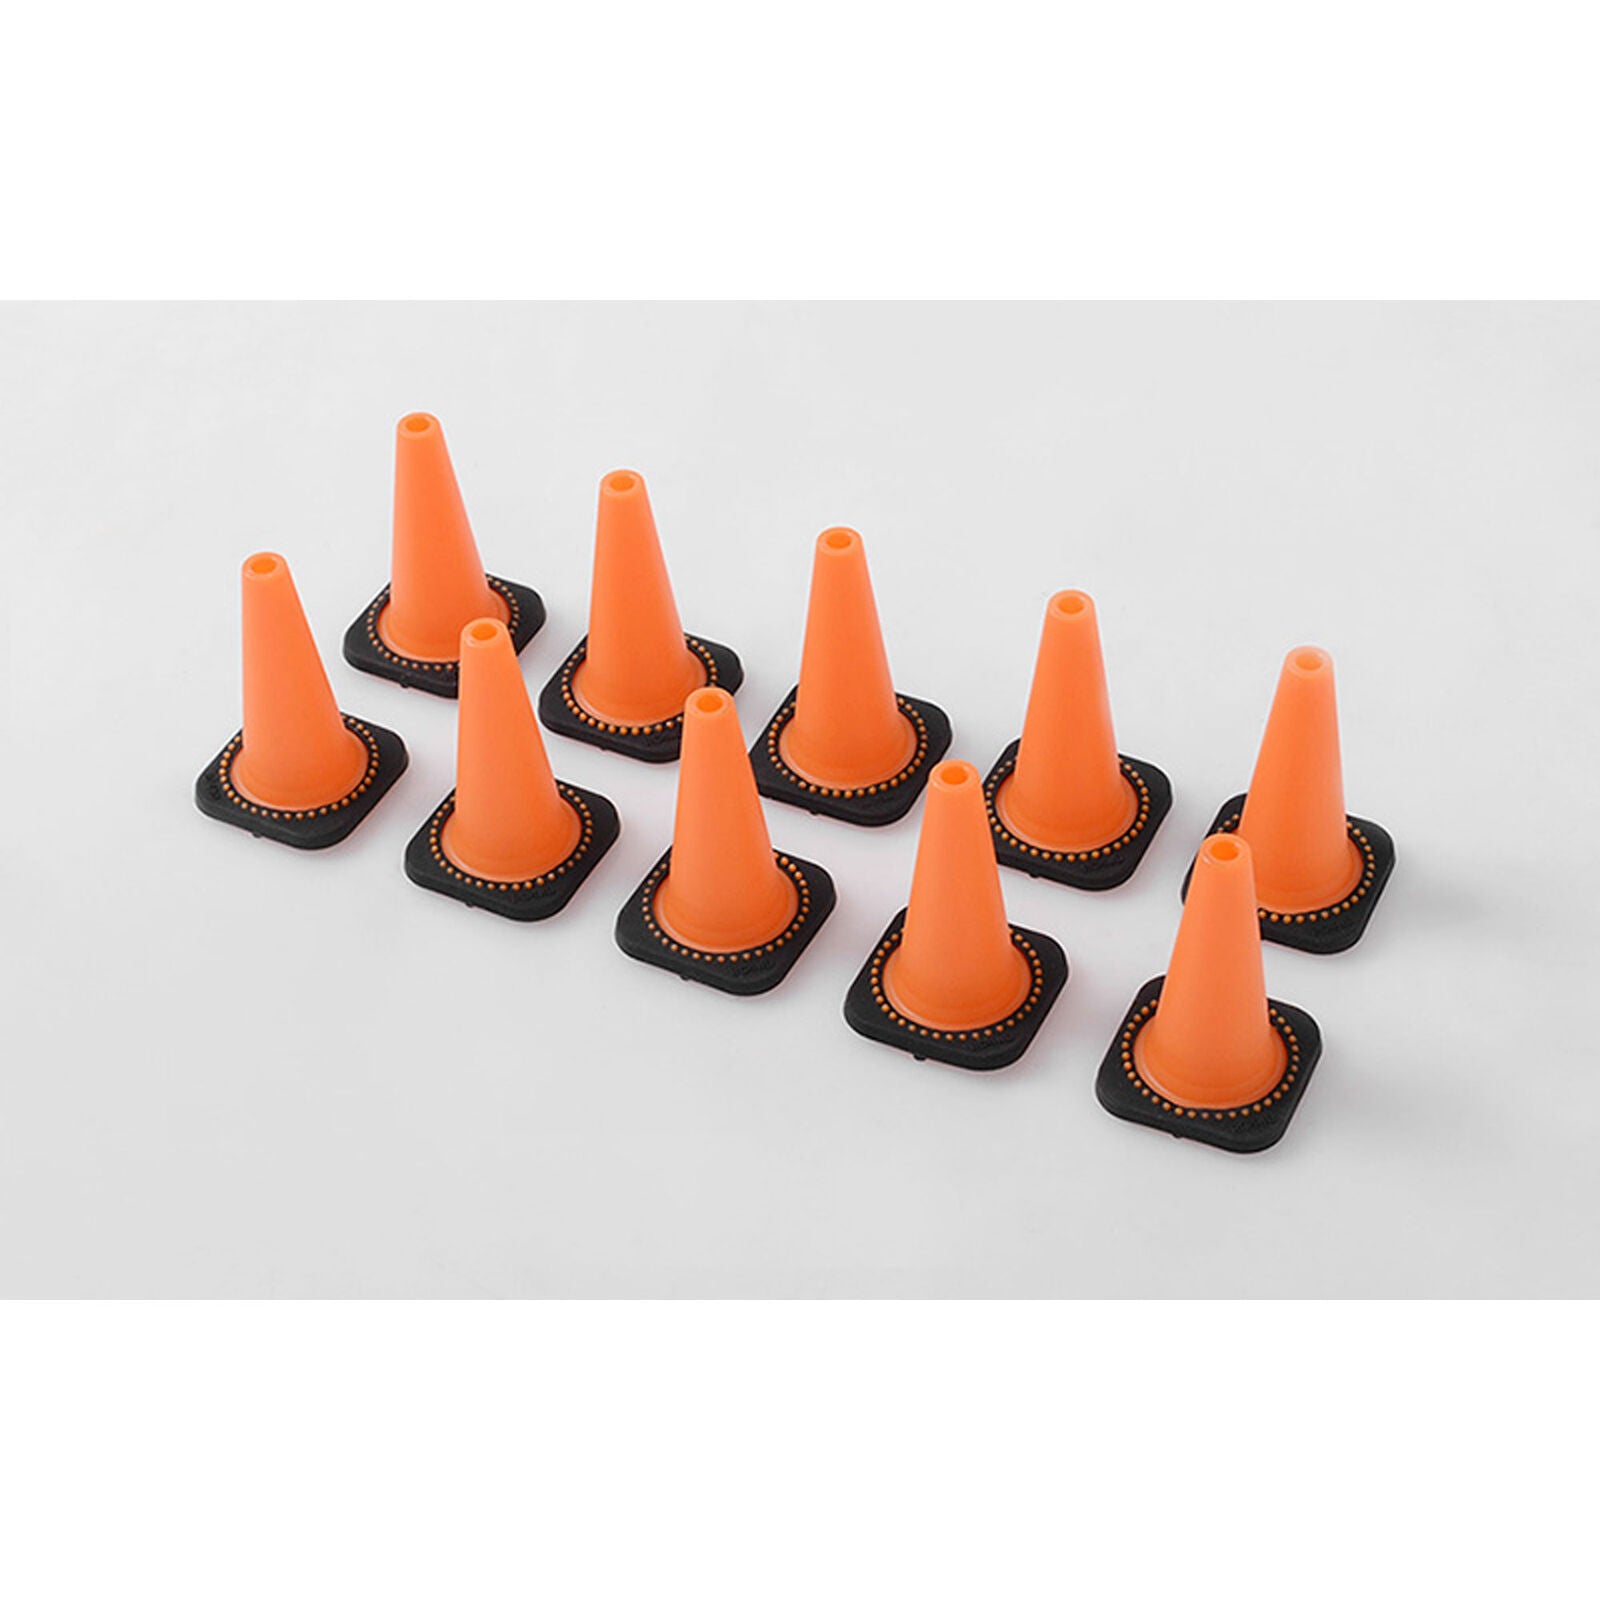 RC4WD Z-S1658 1/10 Remote Control Hobby Size Traffic Cones (10)